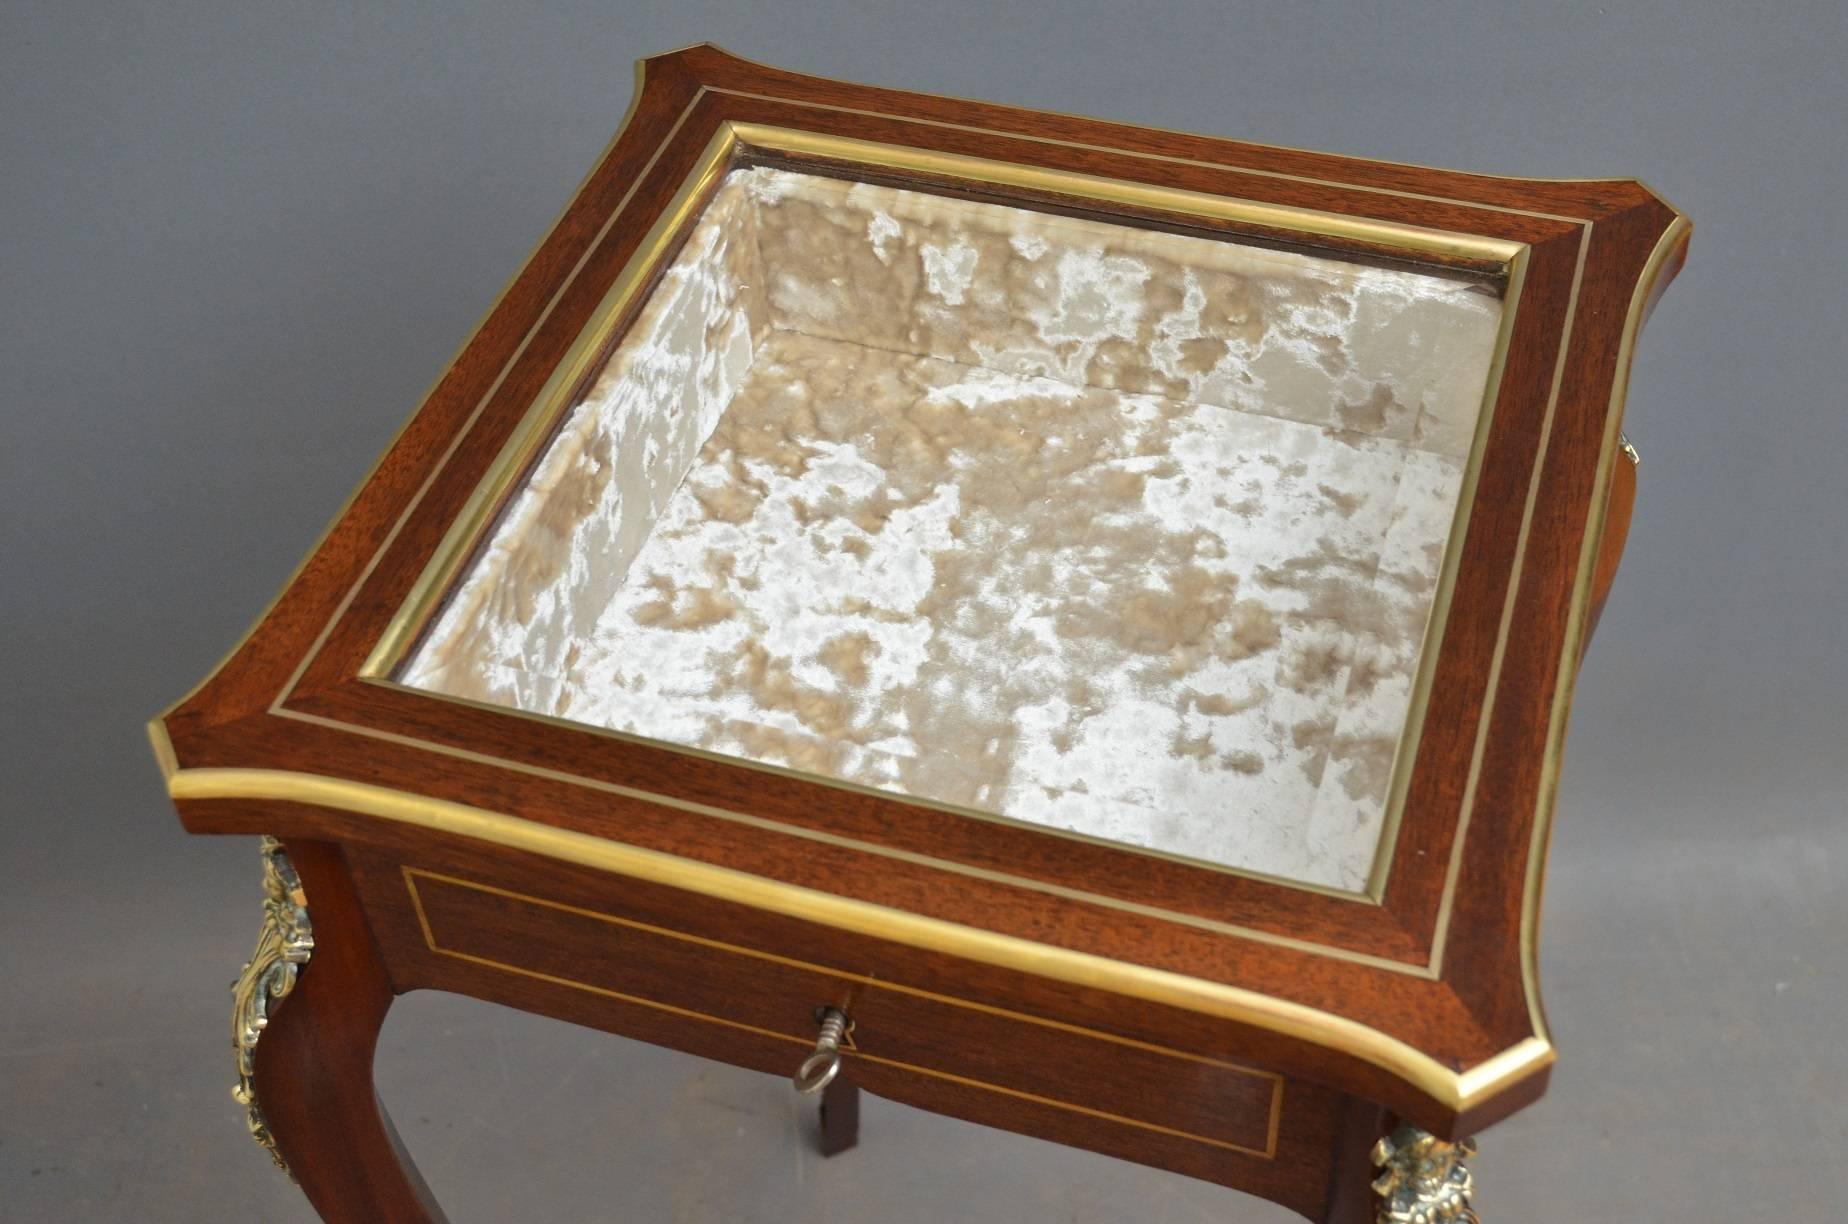 Sn4030 Late 19th century French display table in rosewood, having brass inlaid lid with original bevelled edge glass enclosing crushed velvet interior, standing on curvilinear legs with ormolu decoration, circa 1880.
Measures: H30